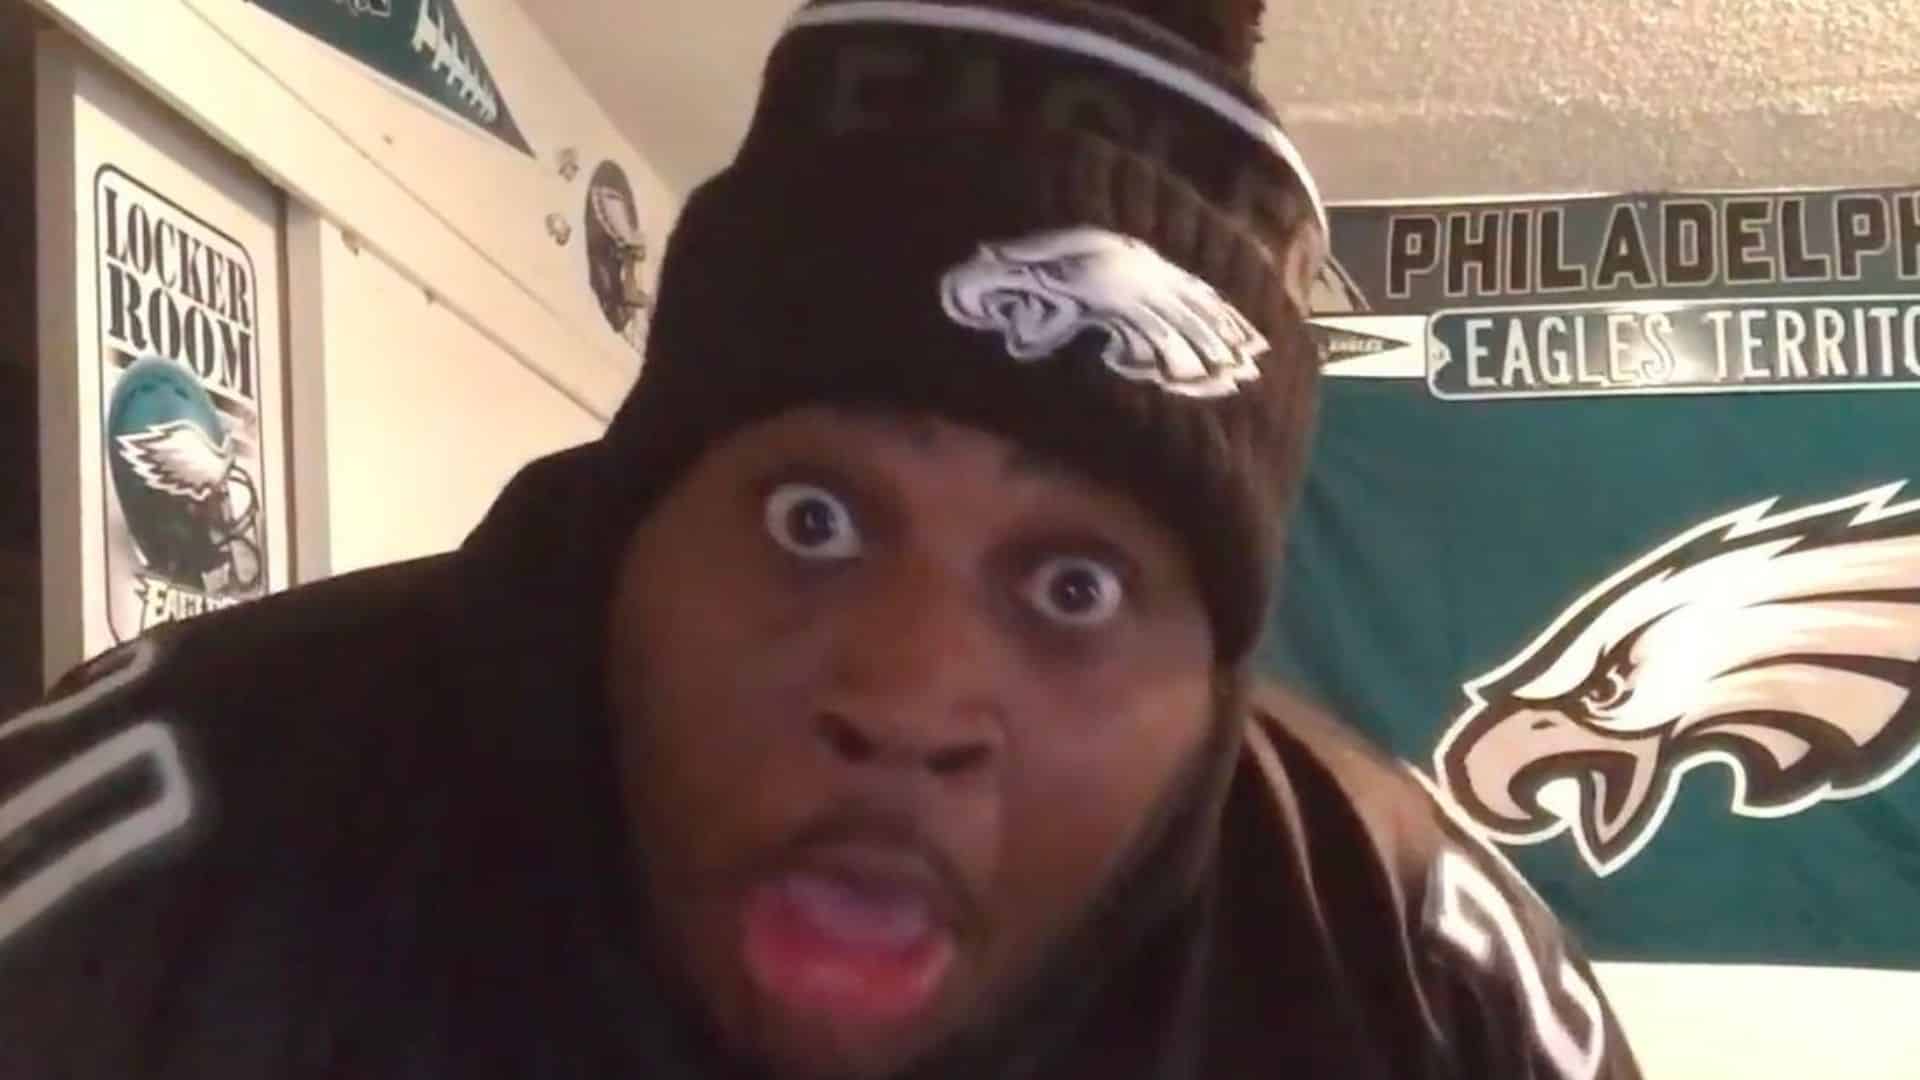 EDP in Eagles clothes reacting to NFL game